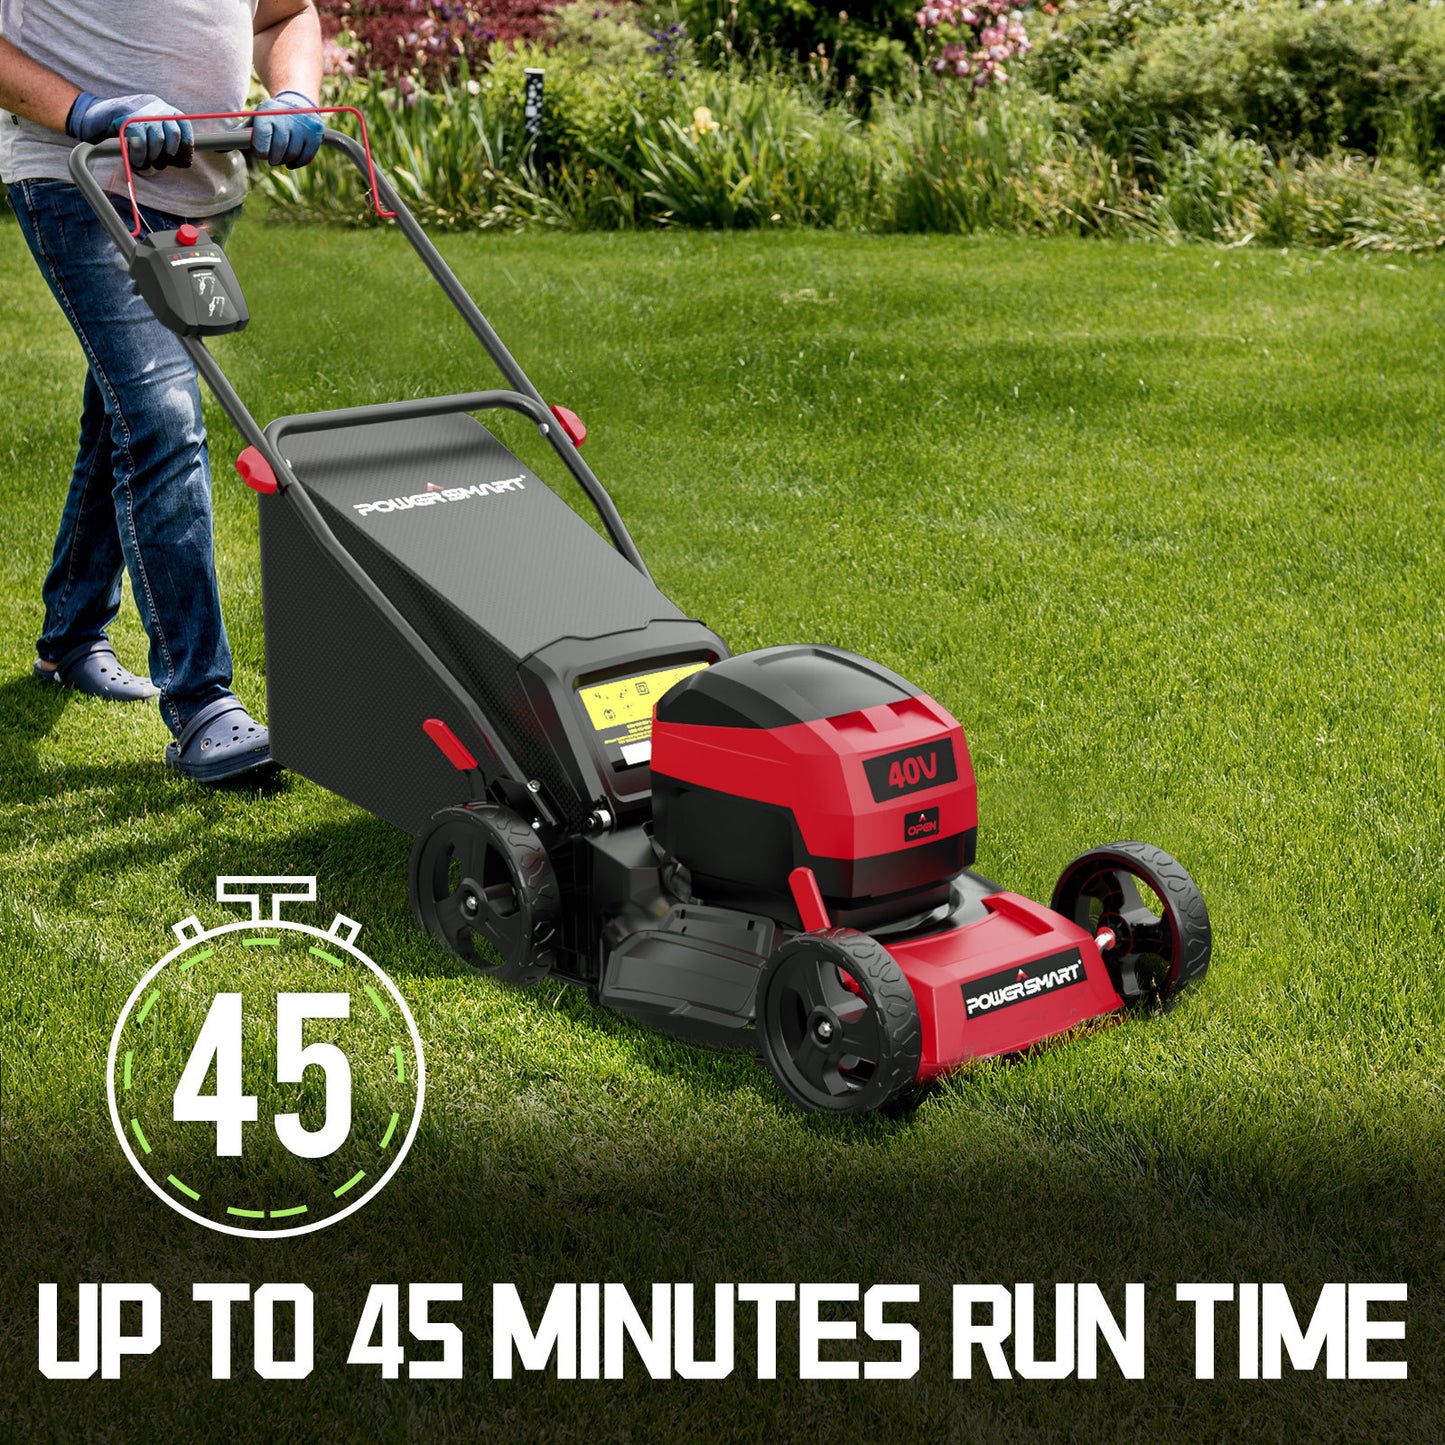 PowerSmart 40V 17 inch Cordless Brushless Electric Push Lawn Mower W 4.0Ah Battery and Charger DB2317